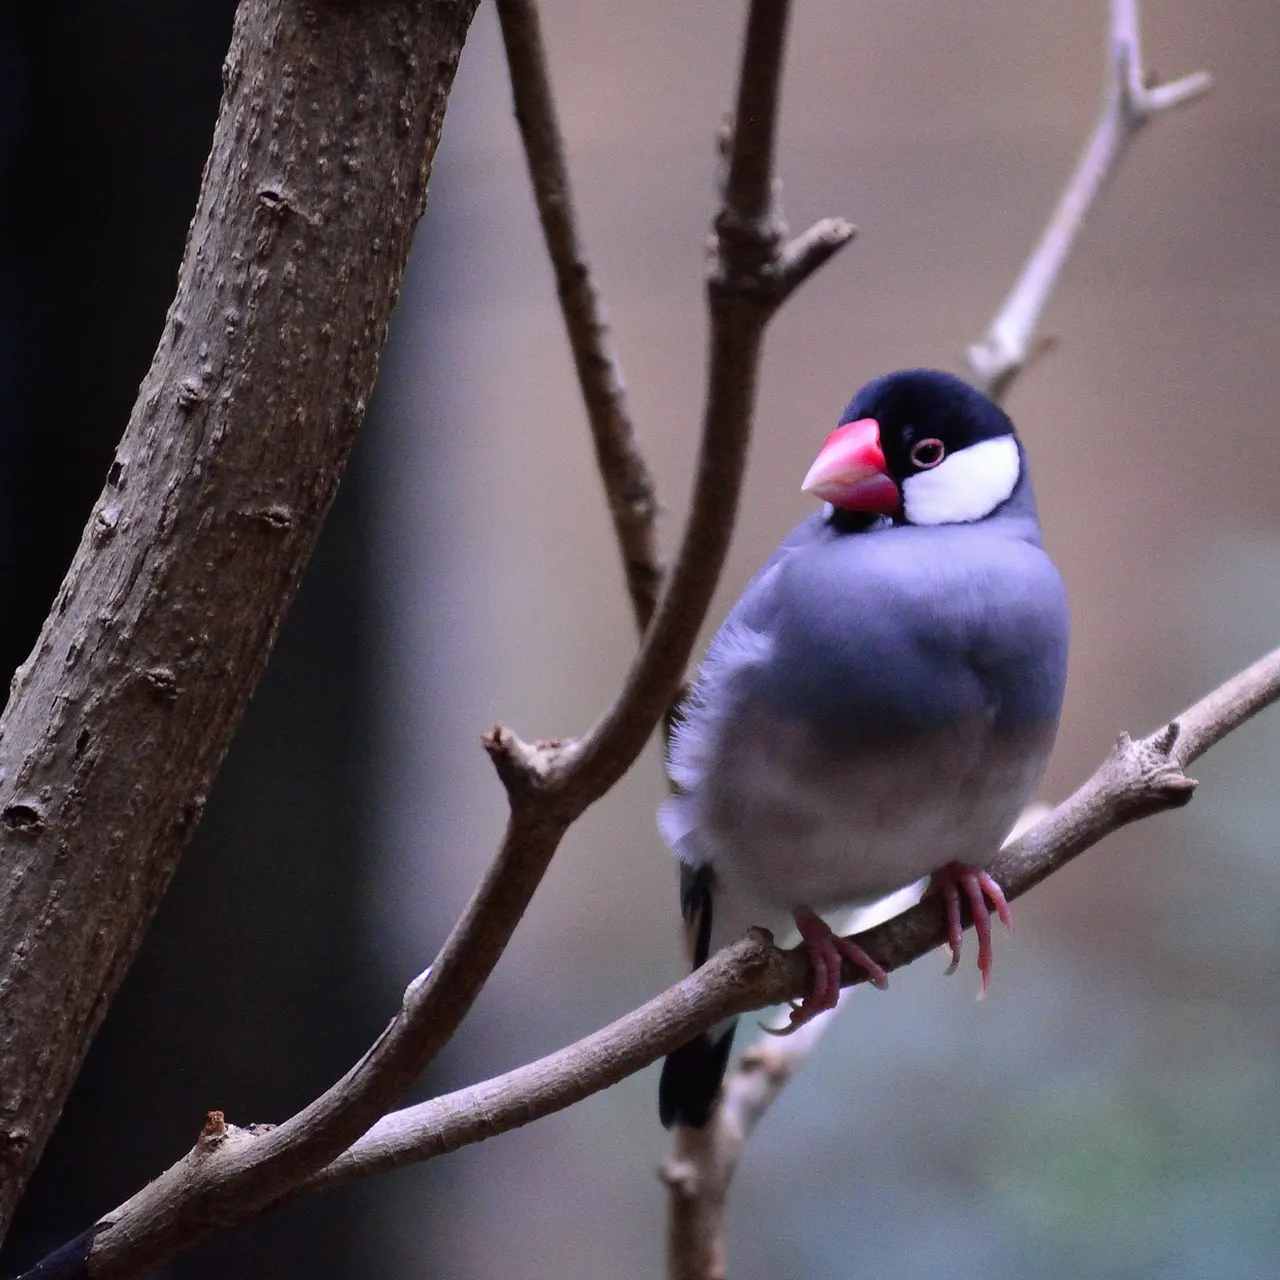 Java Sparrow. Image by Ray Miller from Pixabay.